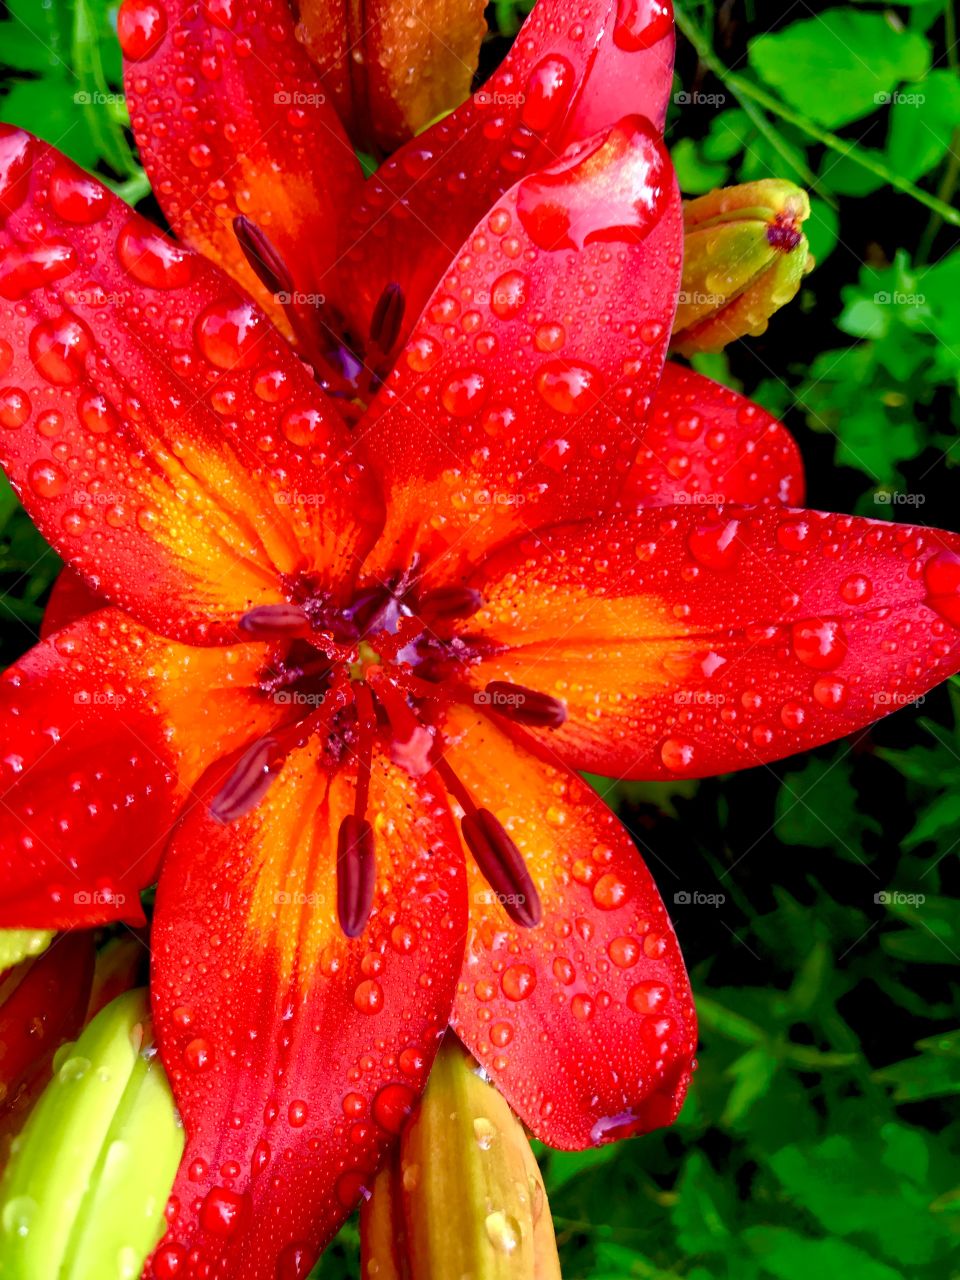 Raindrops on a Lily